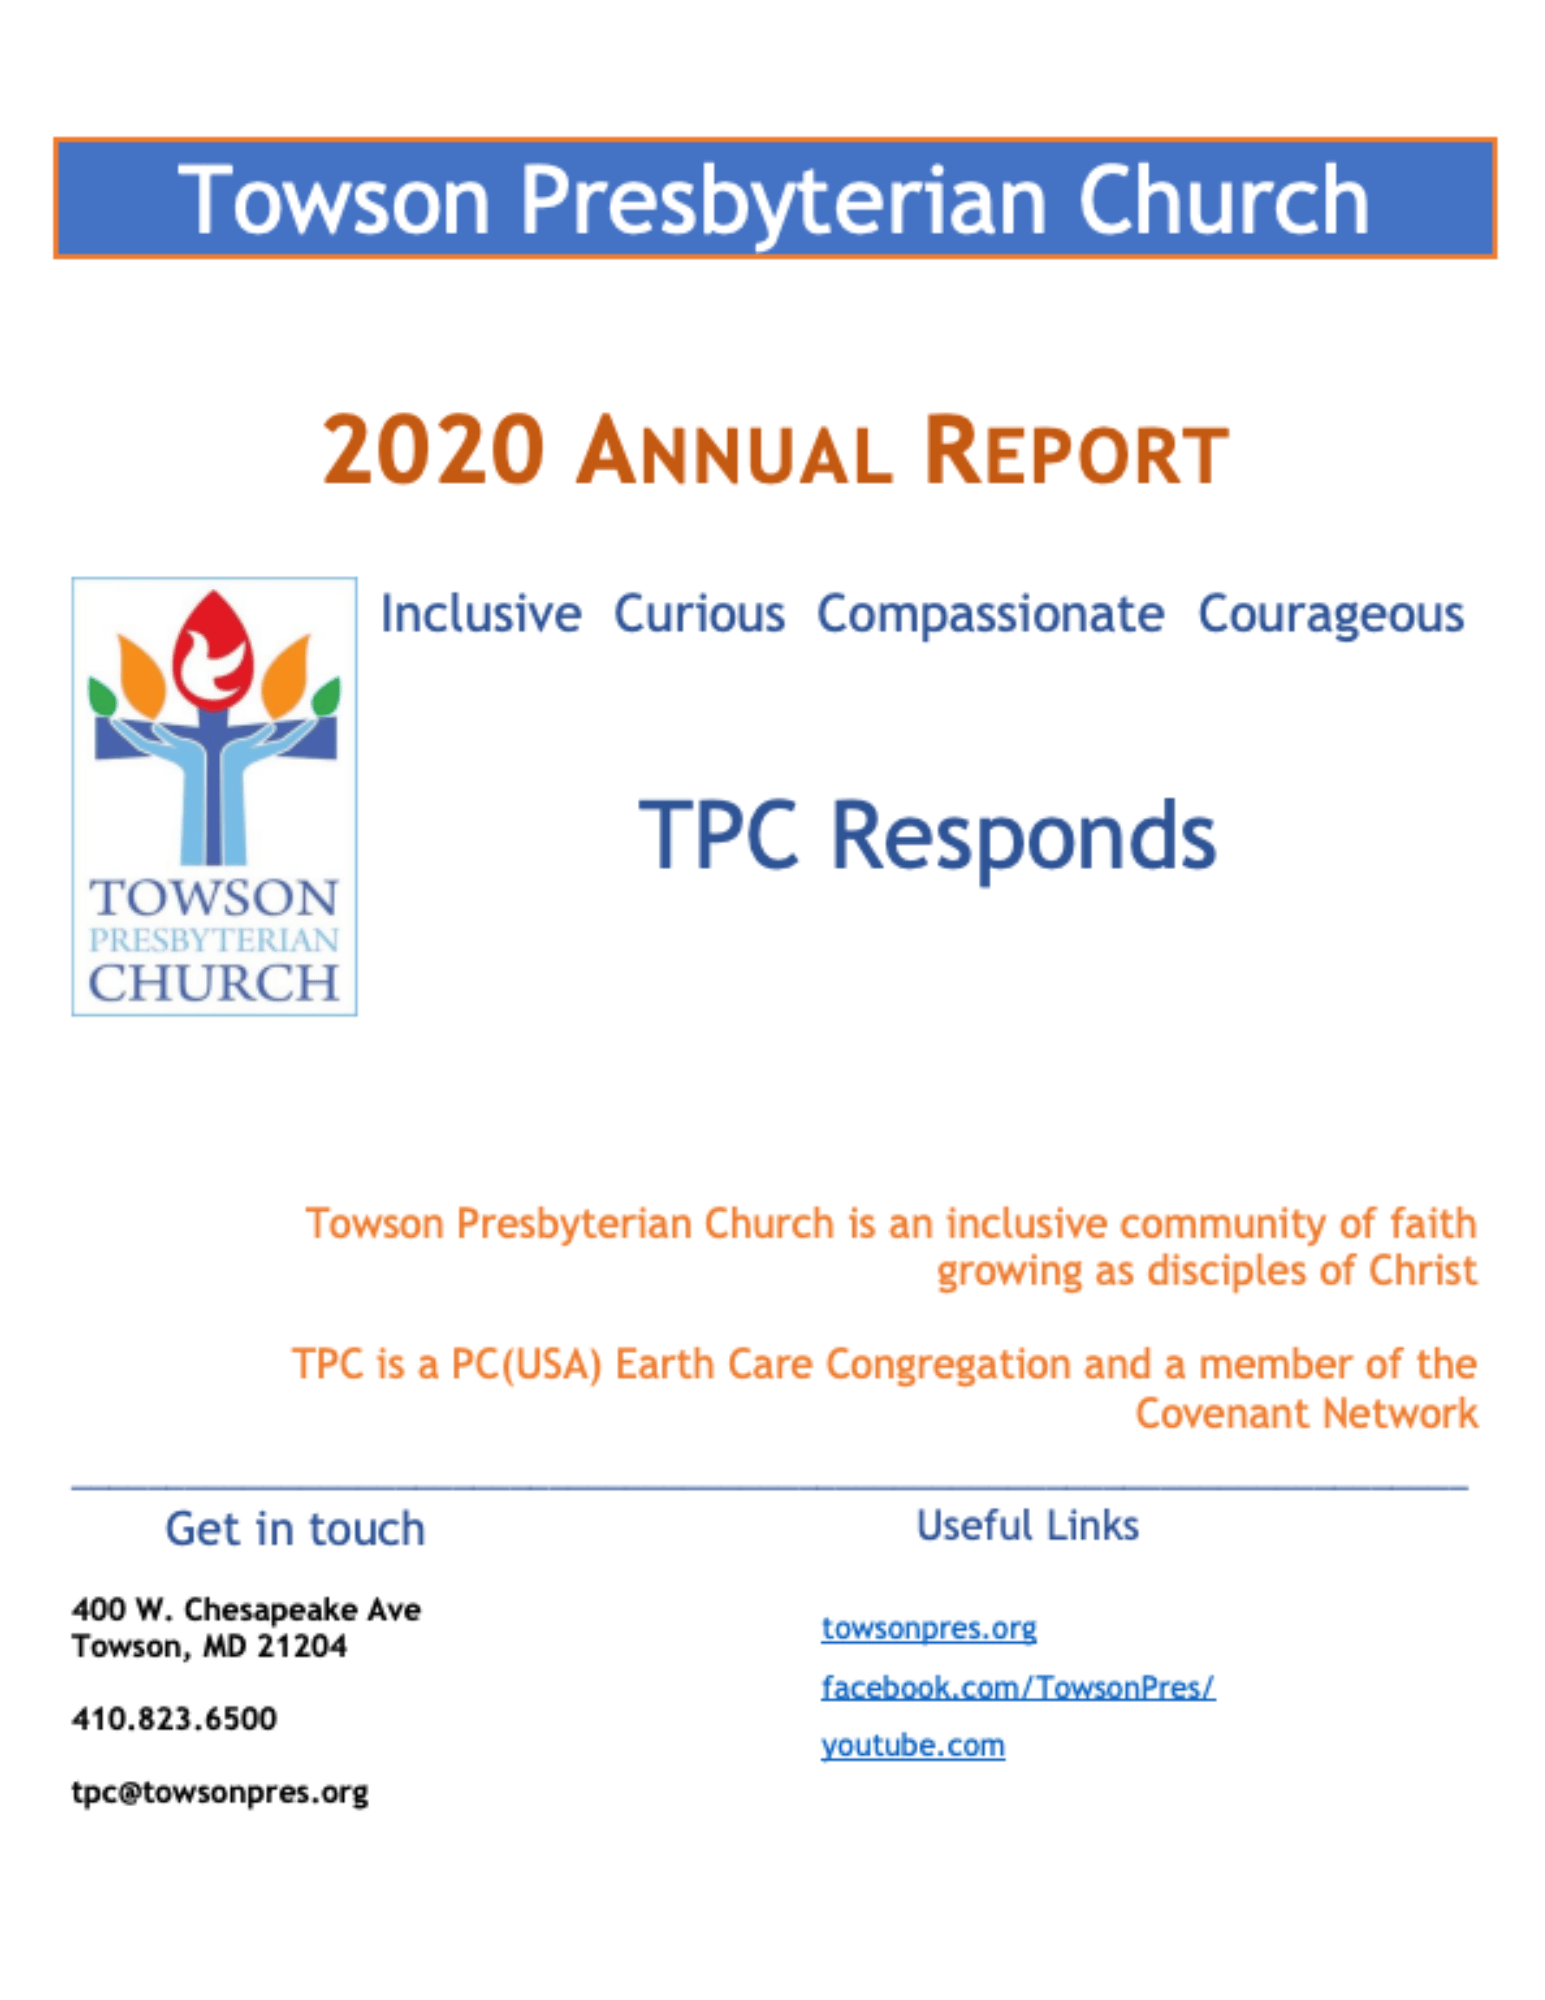 Infographic of the Towson Presbyterian Church 2020 Annual Report.